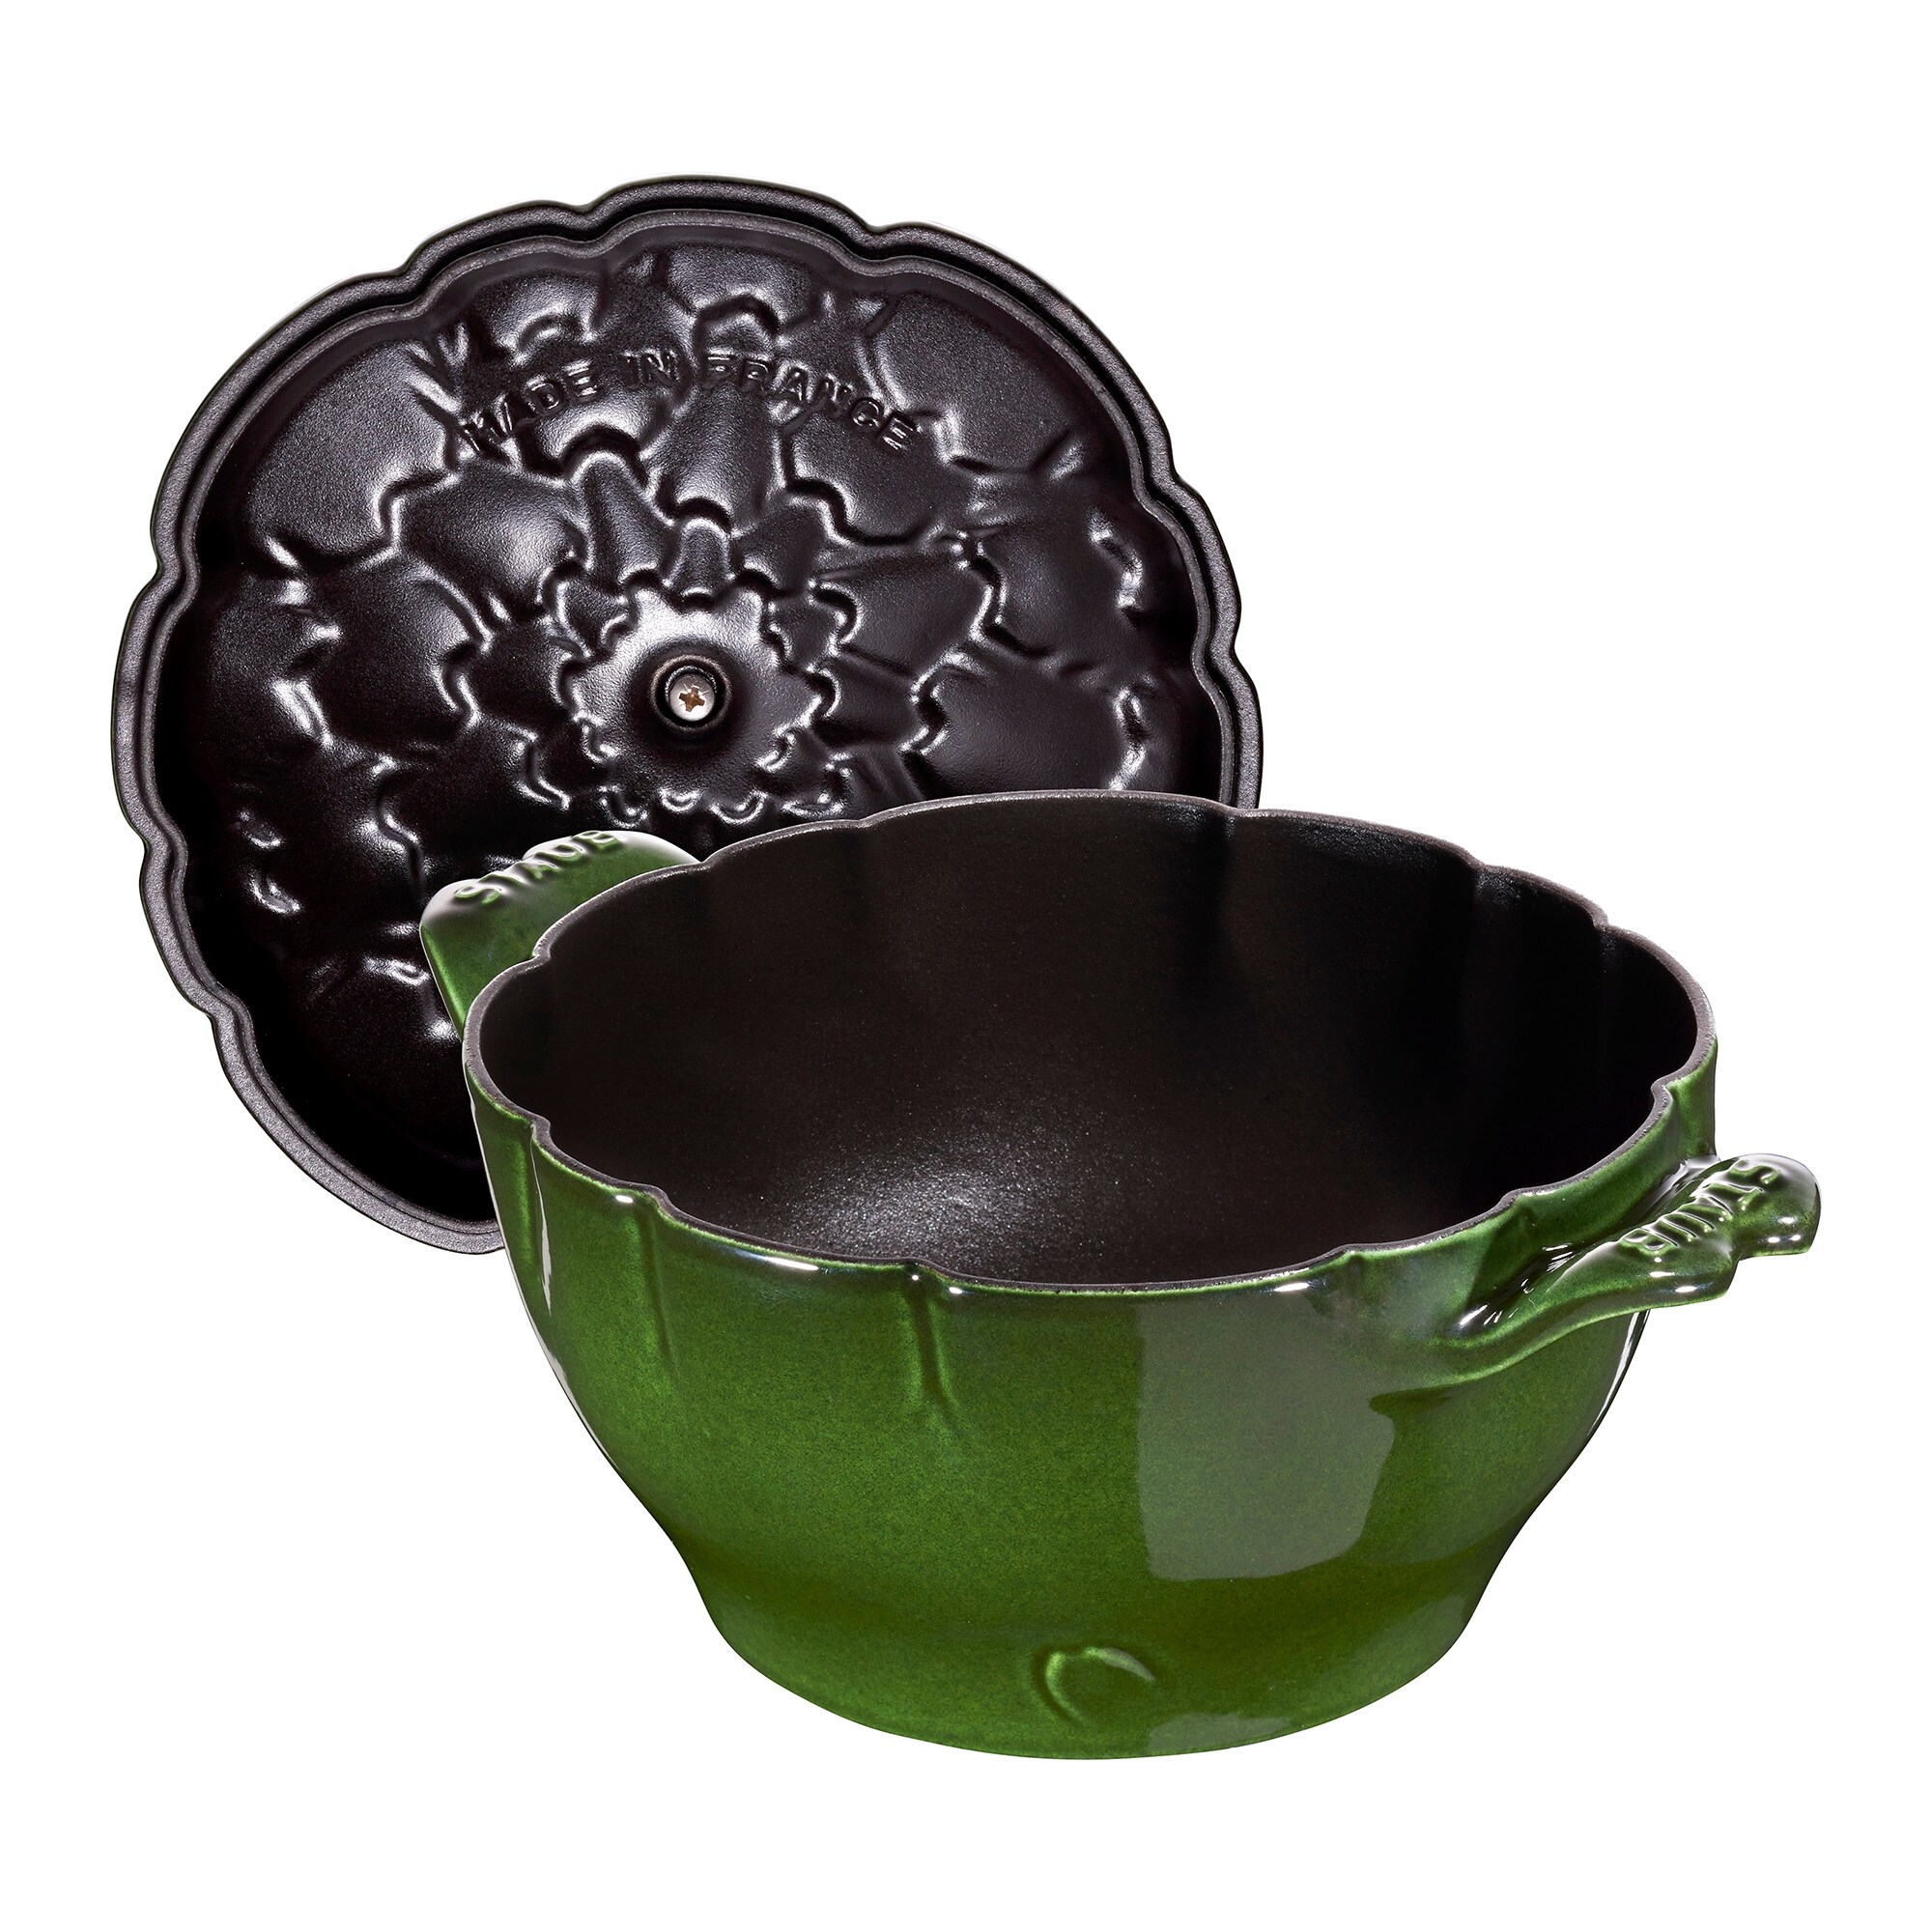 https://ak1.ostkcdn.com/images/products/is/images/direct/4838f2f96cd85d8b452f5fe11c665534051cb1e7/Staub-Cast-Iron-3-qt-Artichoke-Cocotte---Basil.jpg